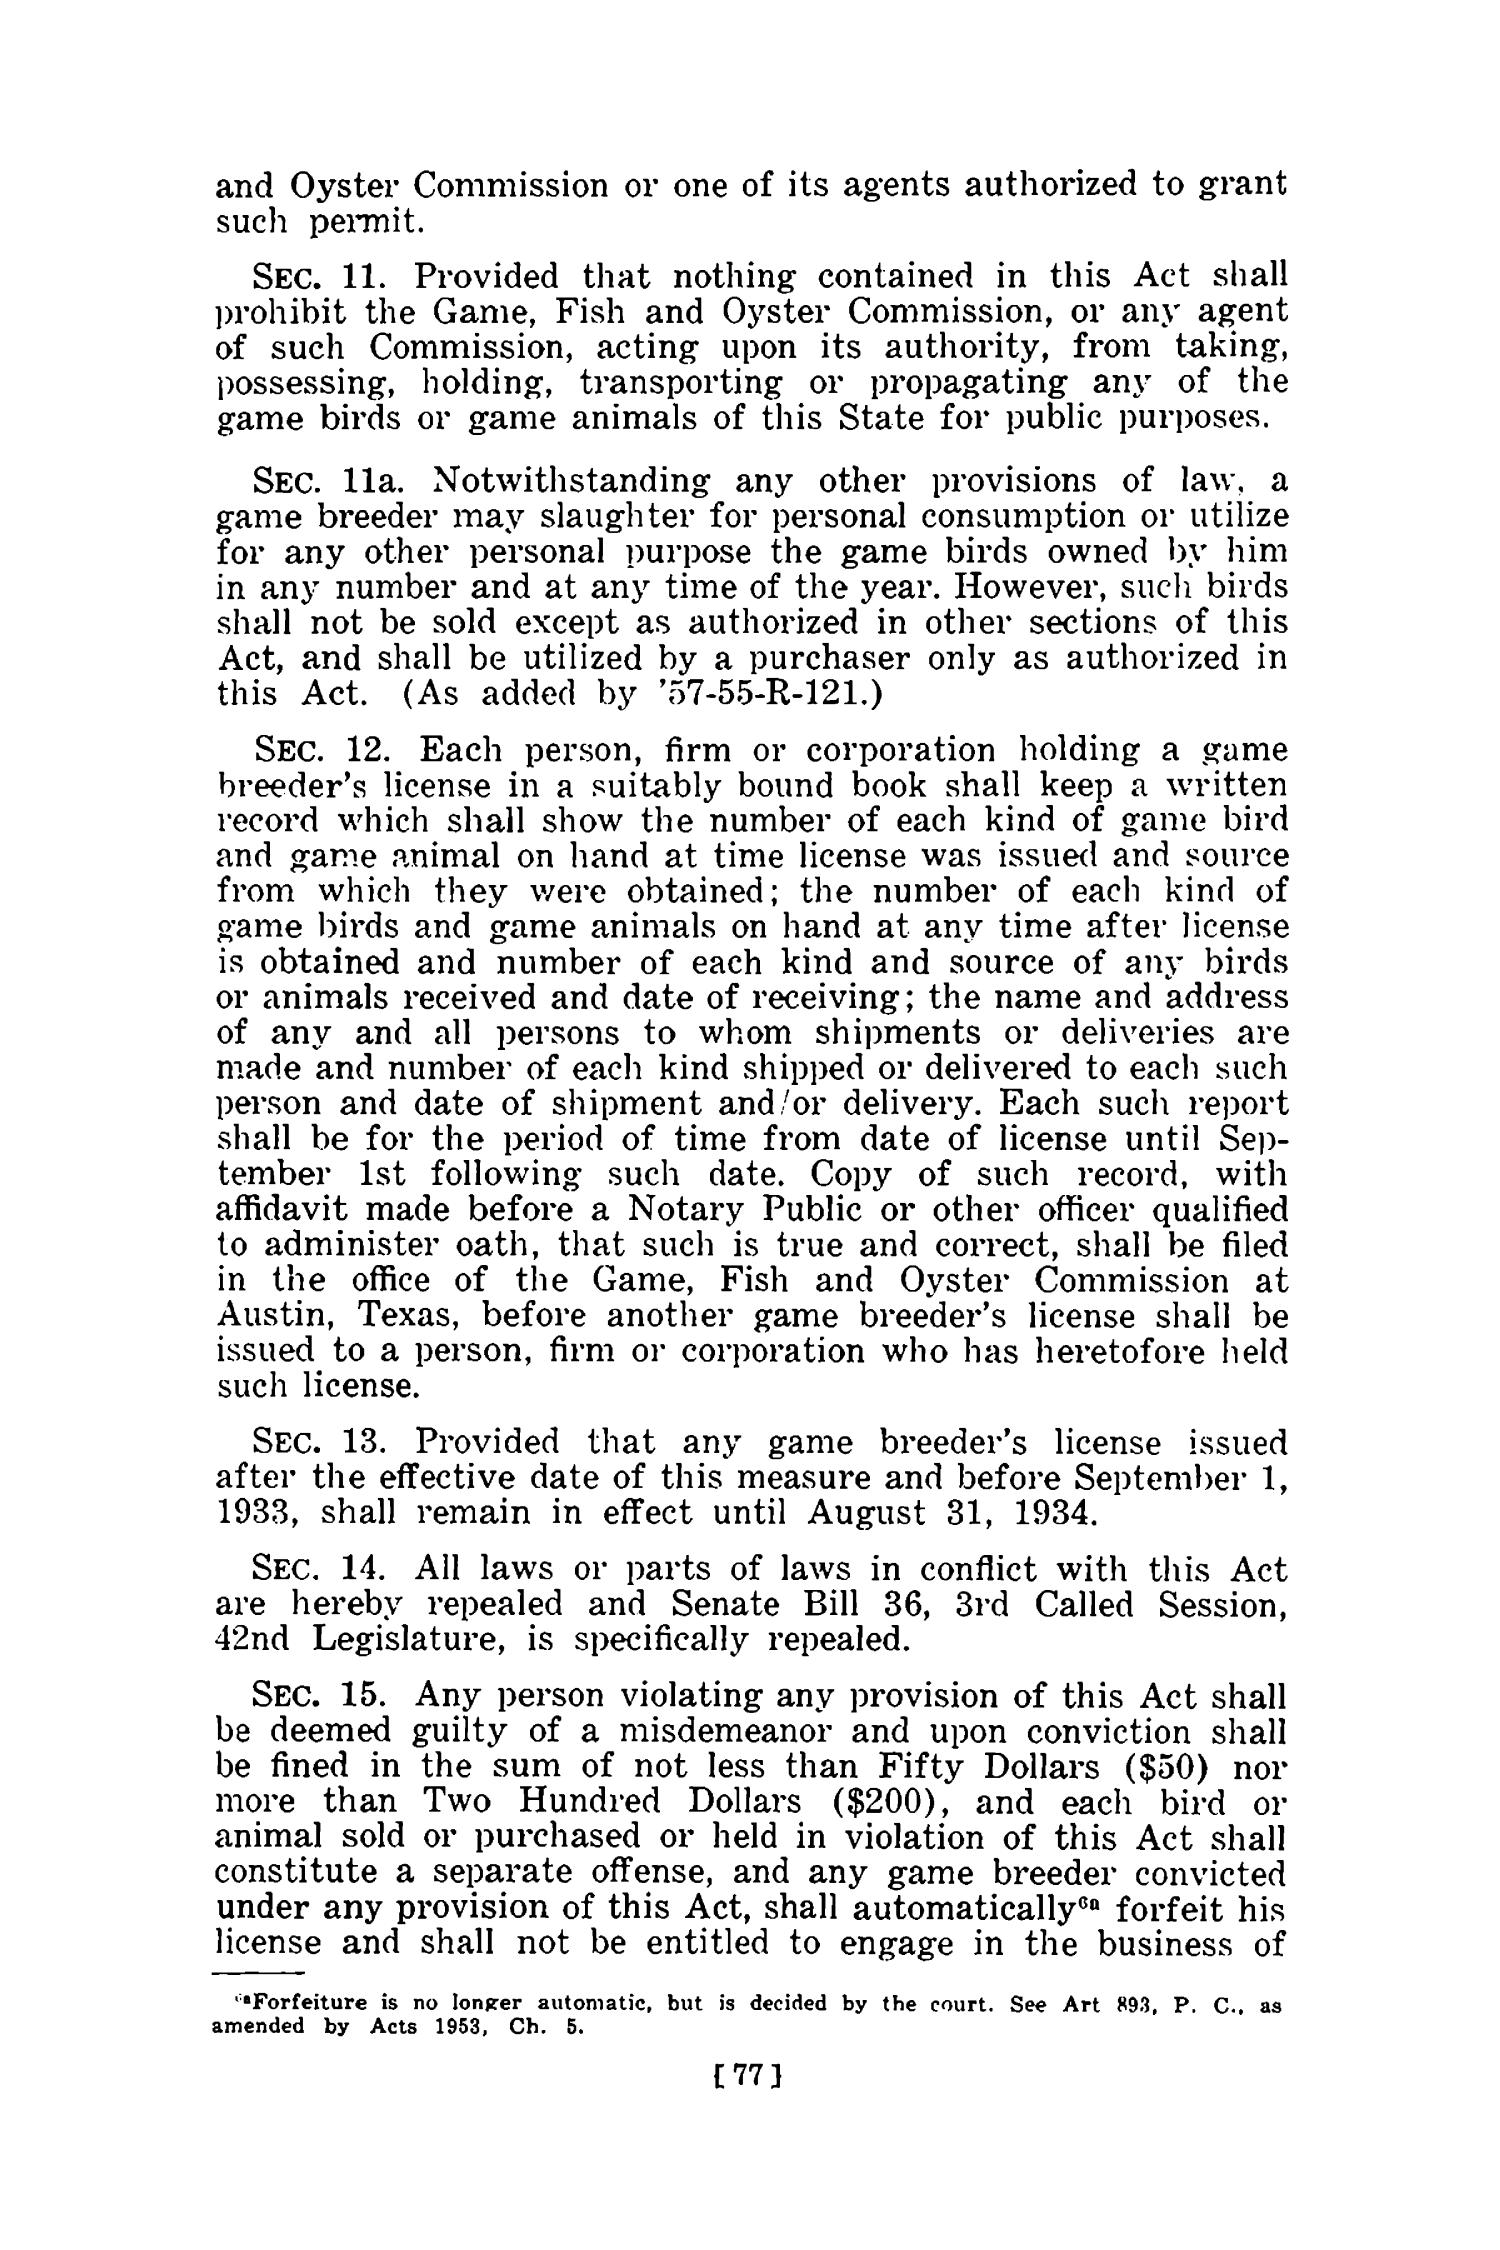 Full Text of the Game, Fish and Fur Laws of Texas with citations of Park Laws, 1965
                                                
                                                    77
                                                